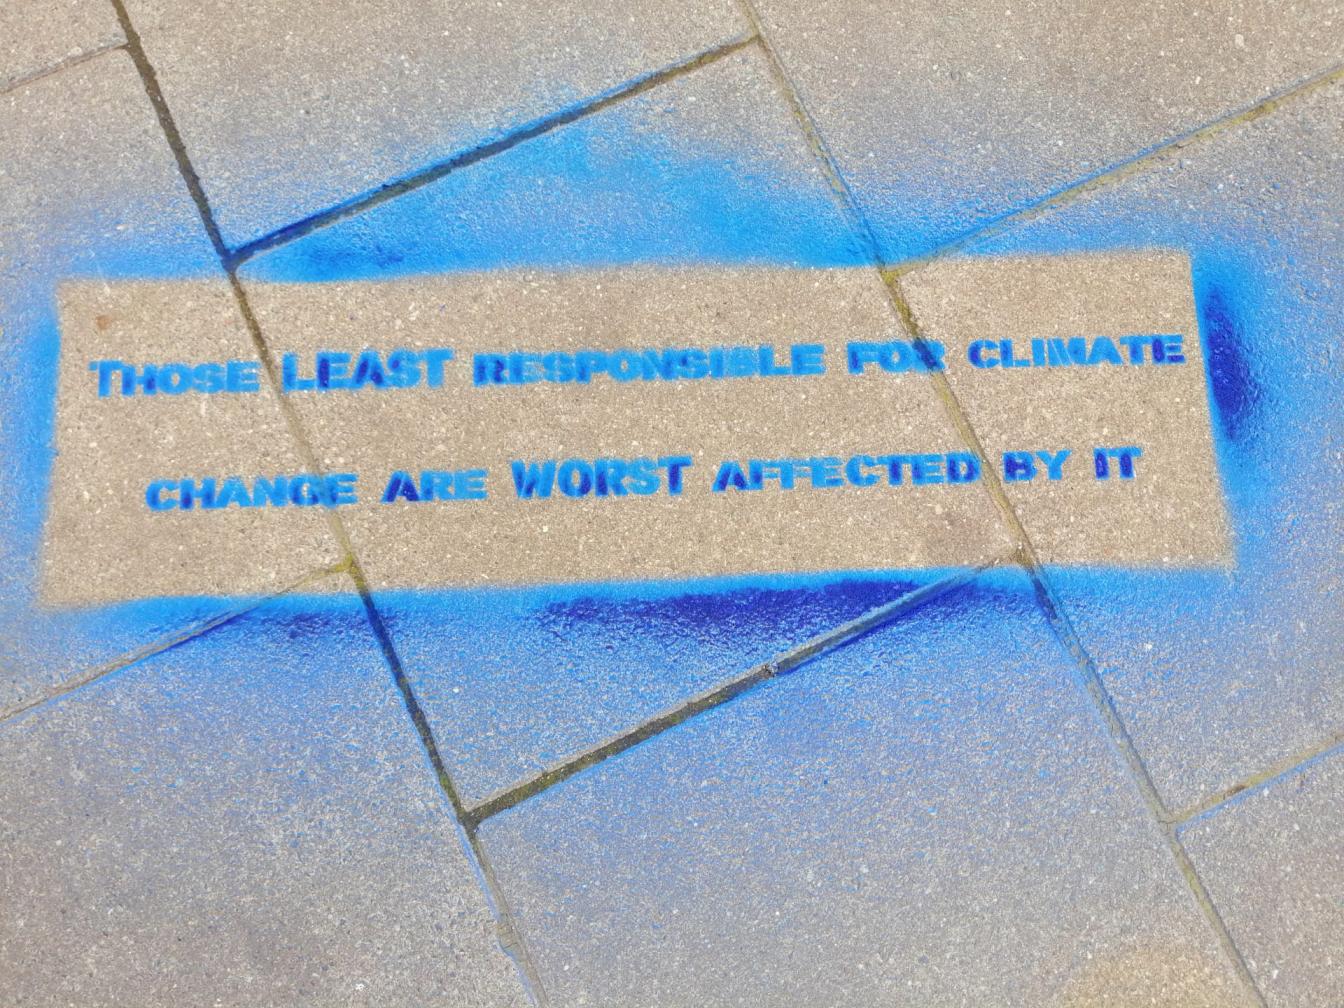 Slogan 'Those least responsible for climate change are worst affected by it'